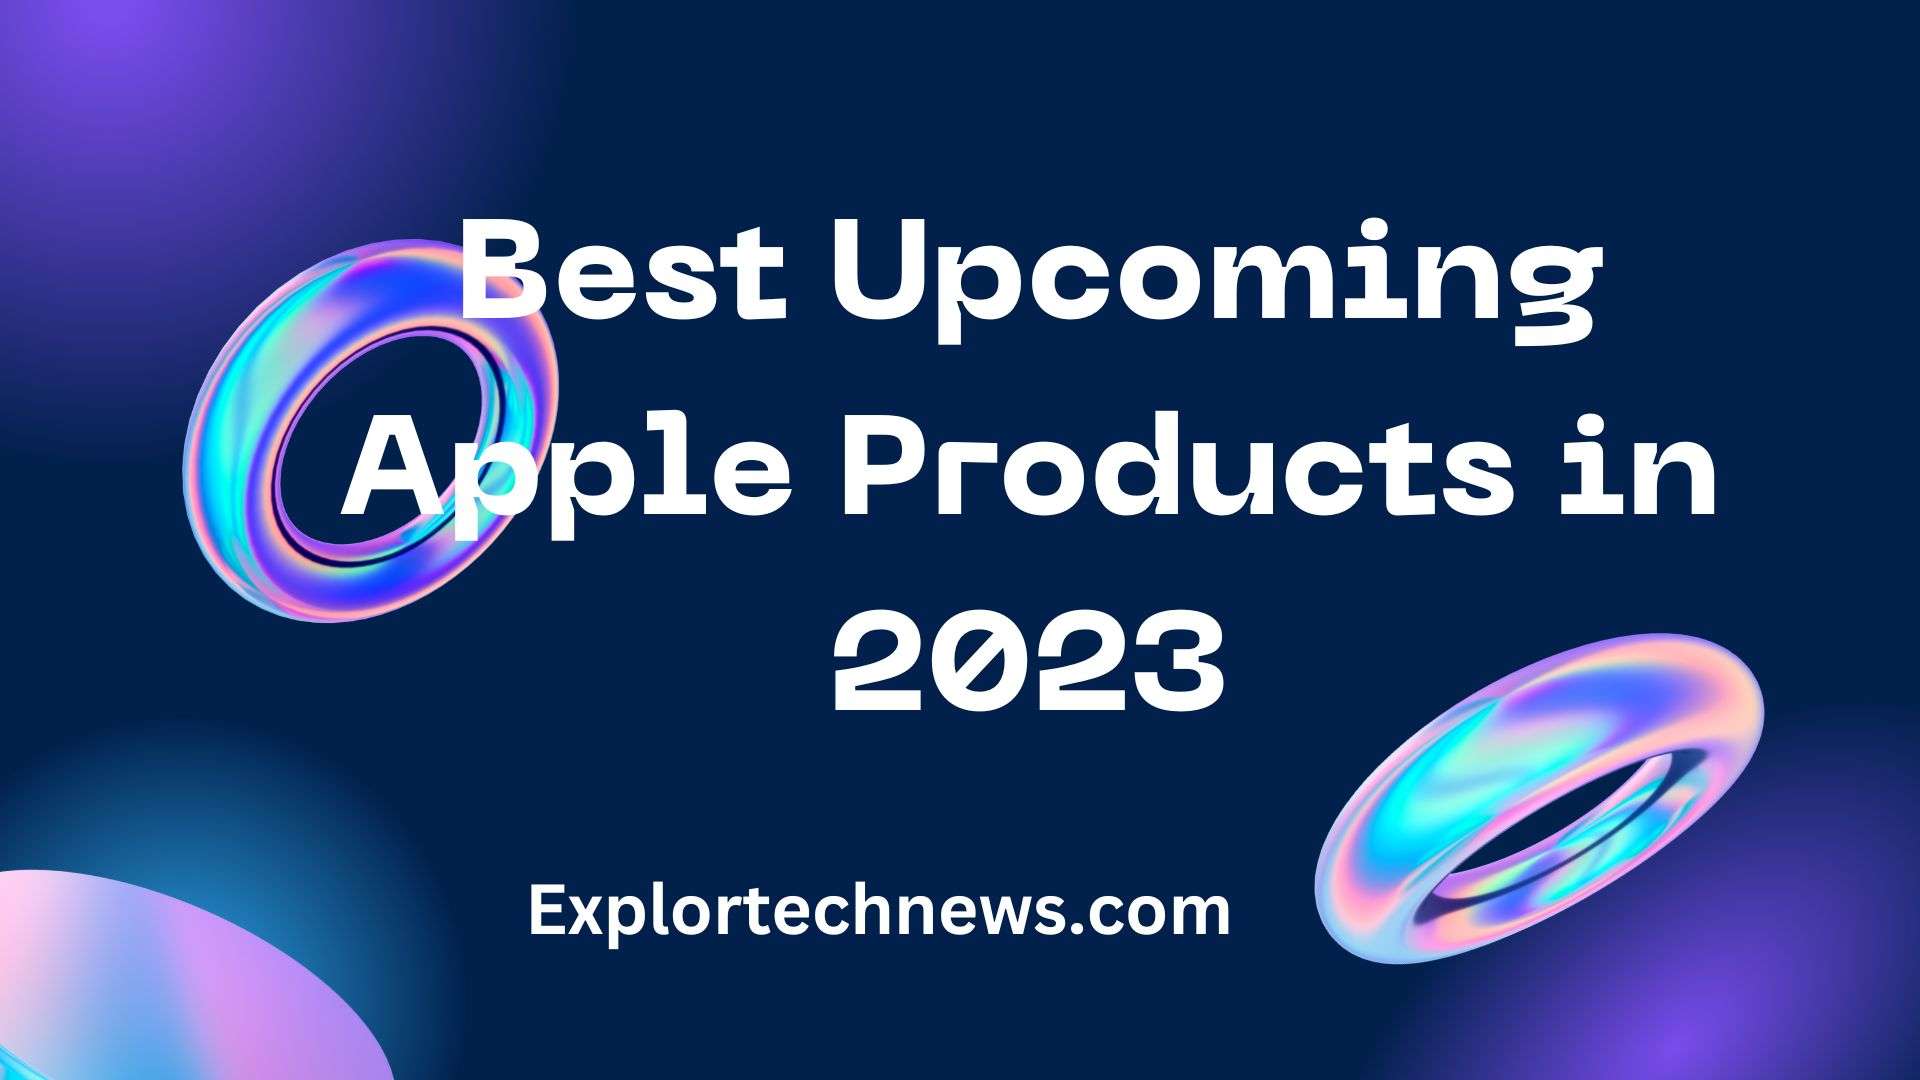 Best upcoming Apple products in 2023